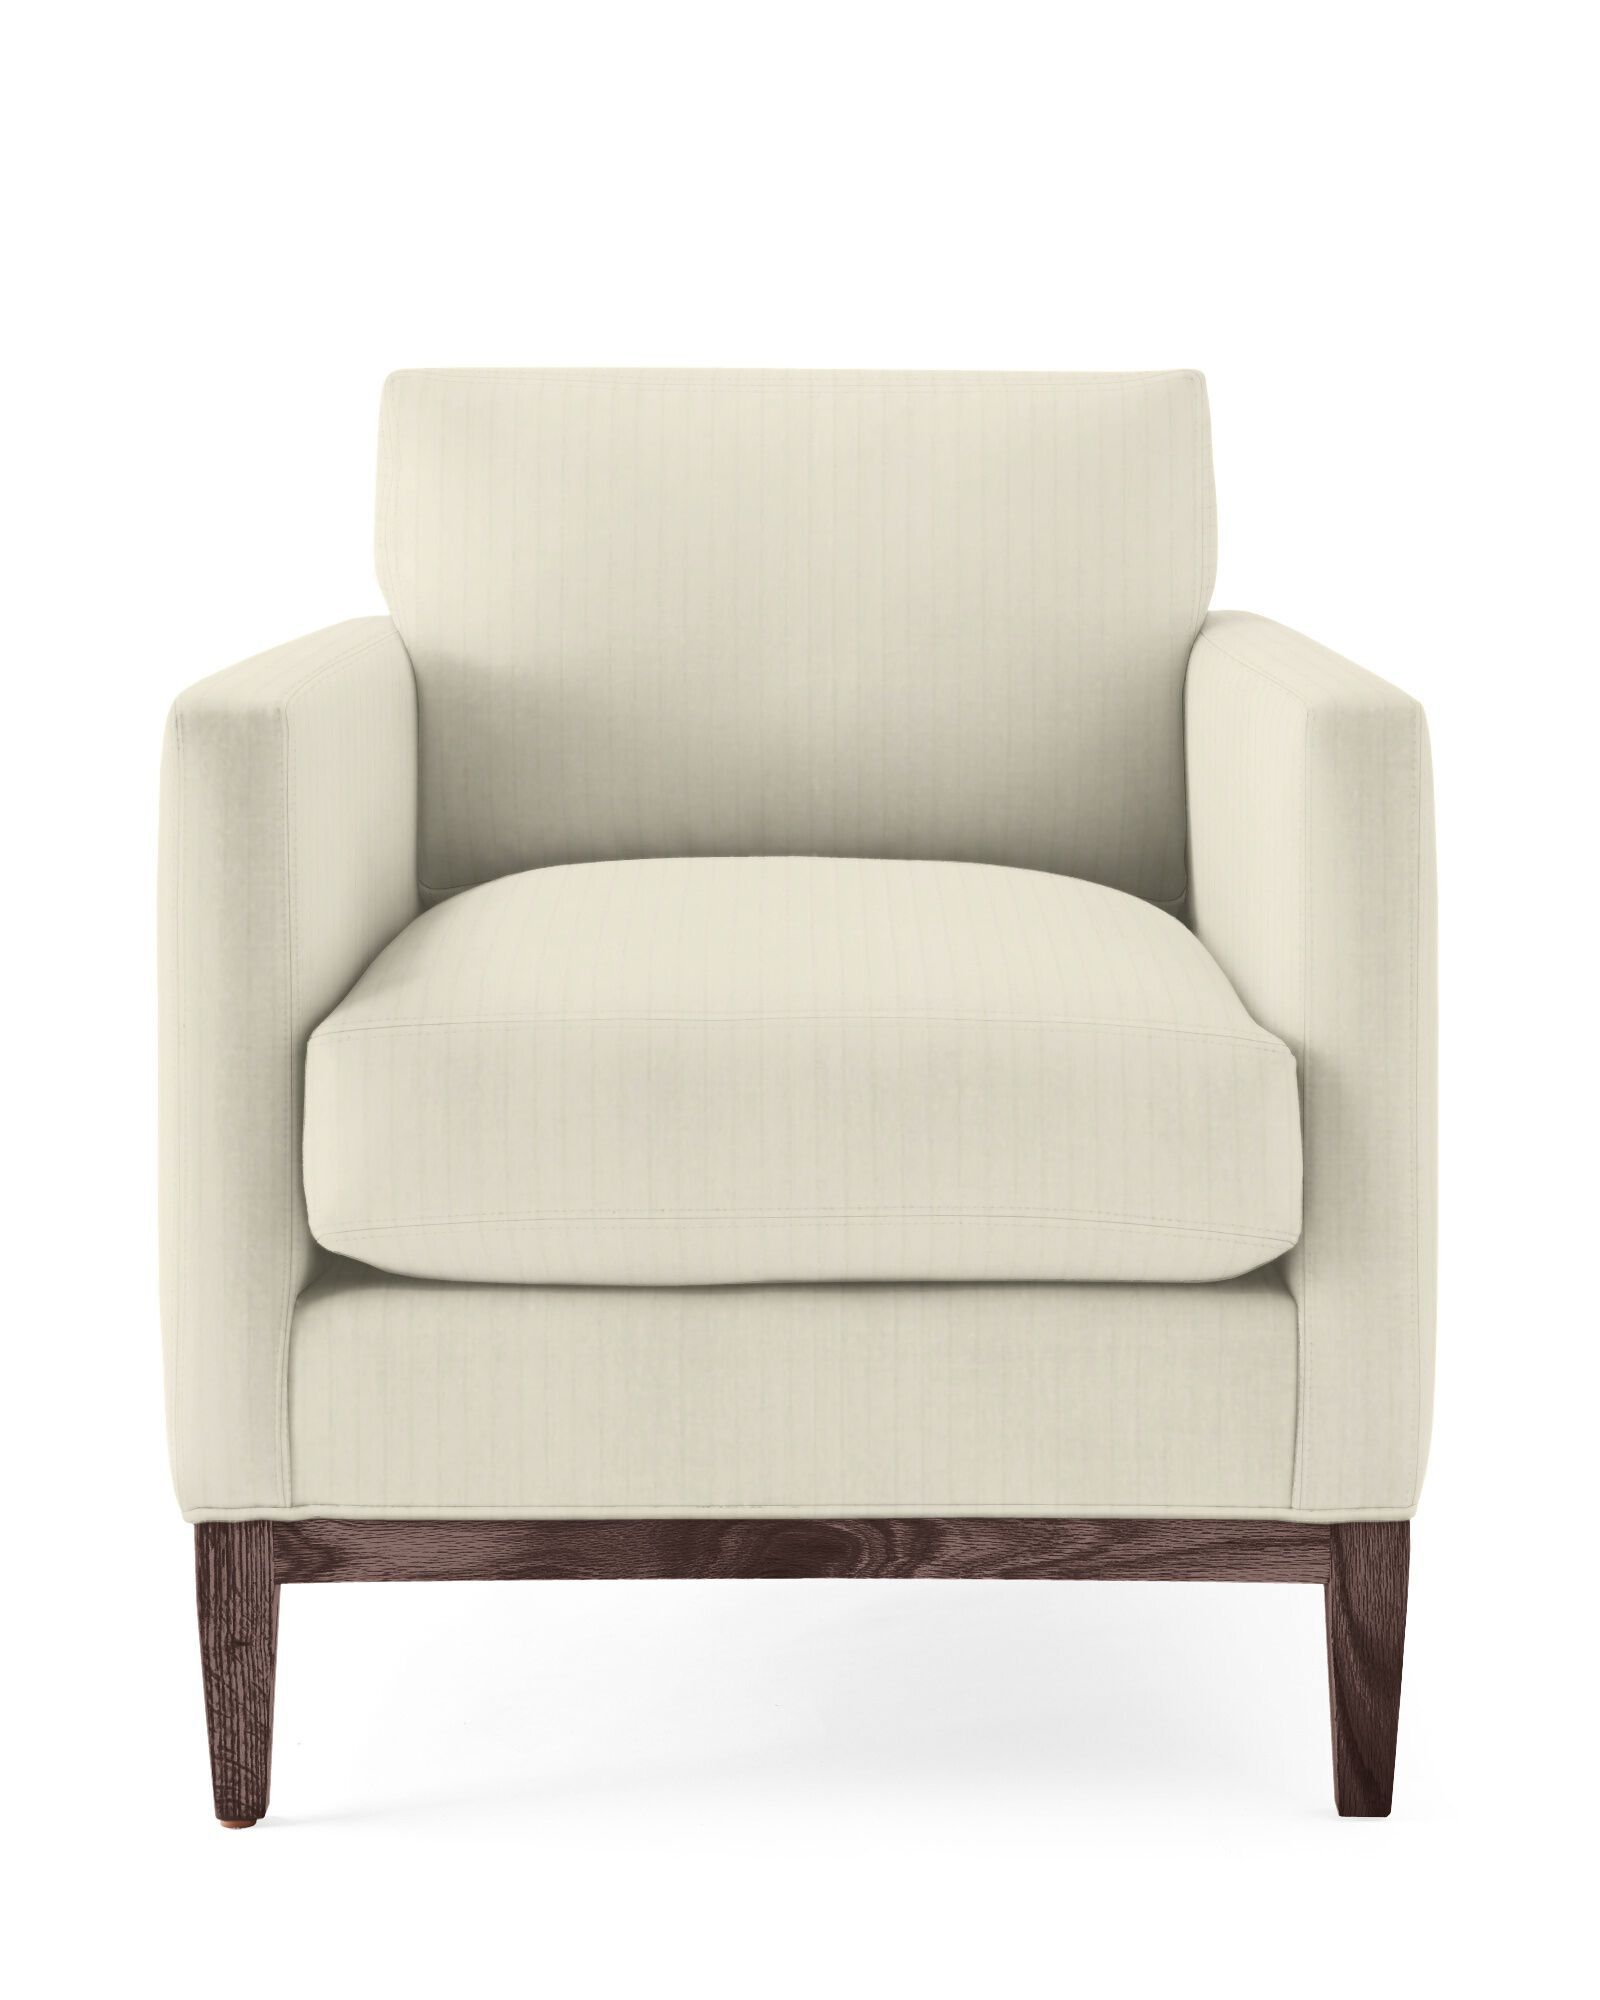 Barton Chair | Serena and Lily